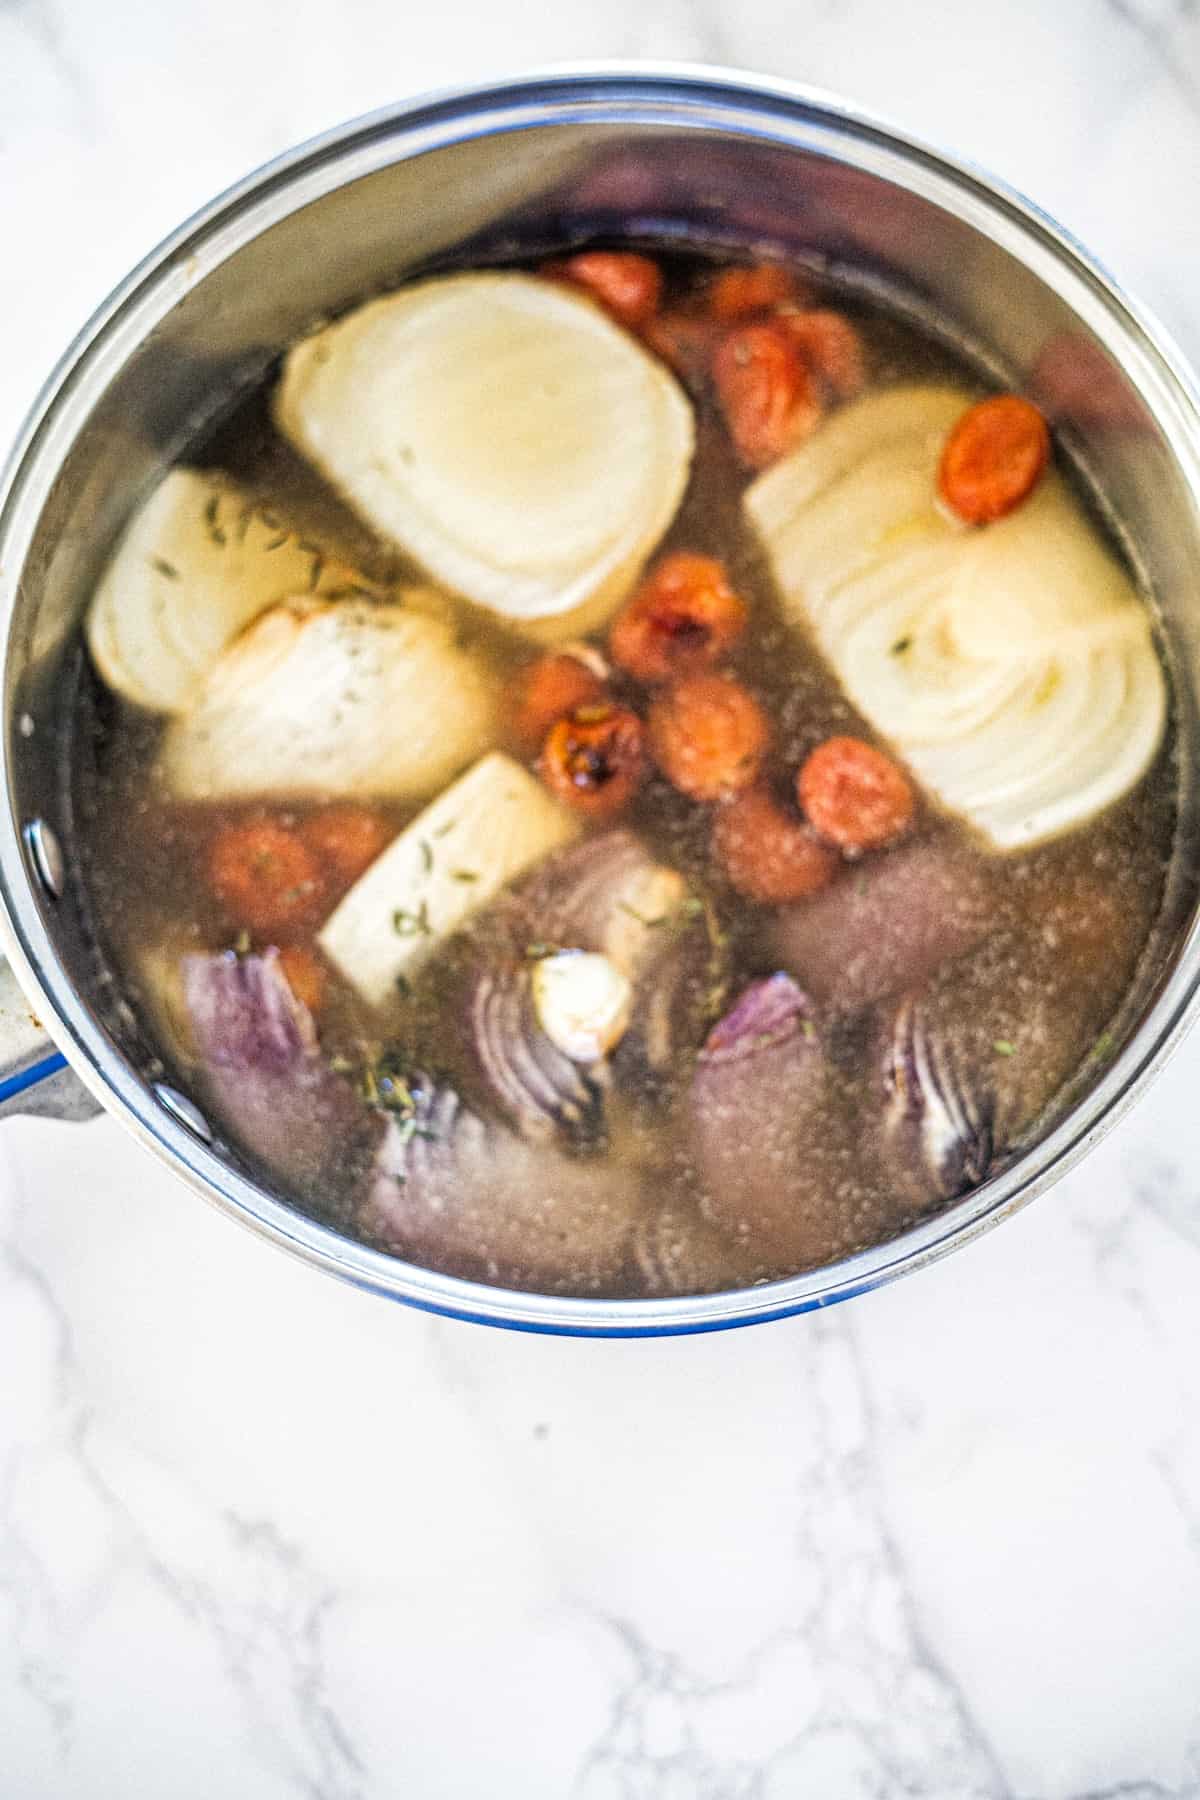 A pot of soup with onions and carrots in it.